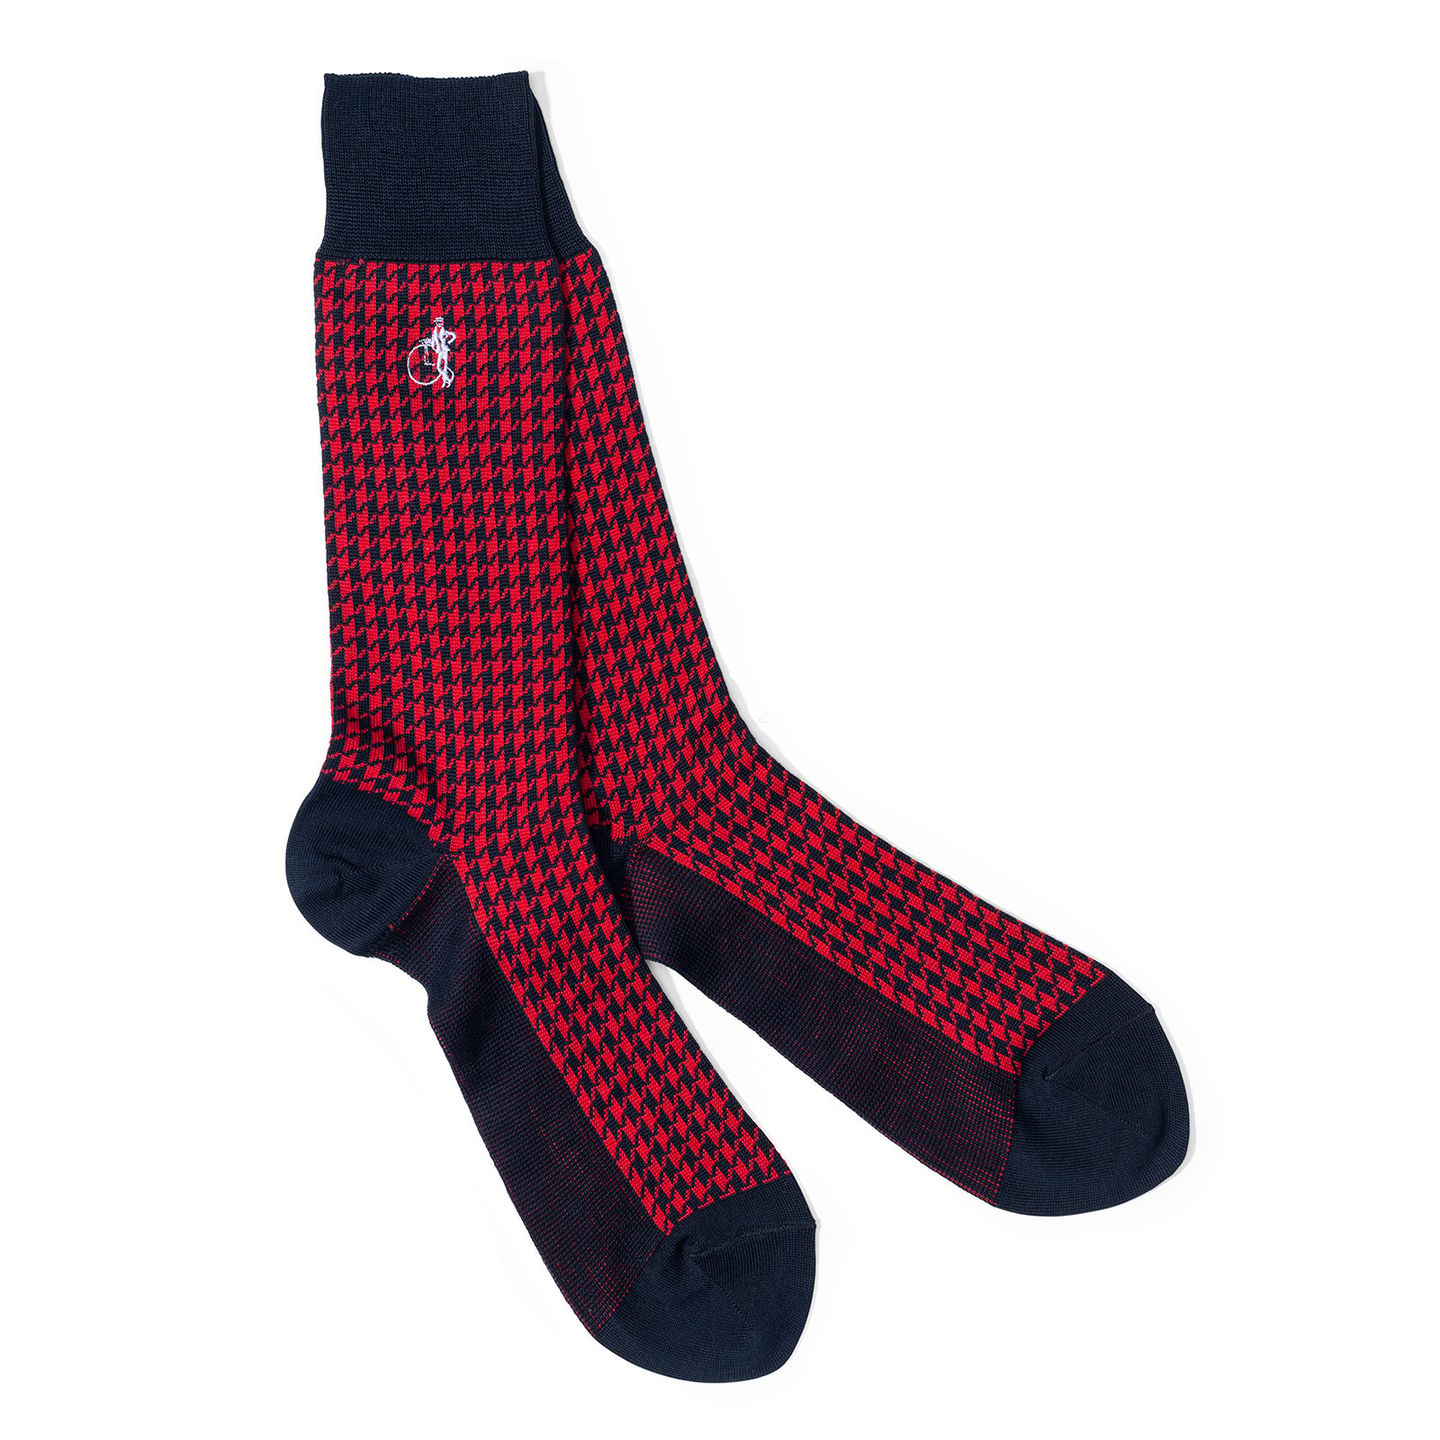 A pair of red and blue patterned socks